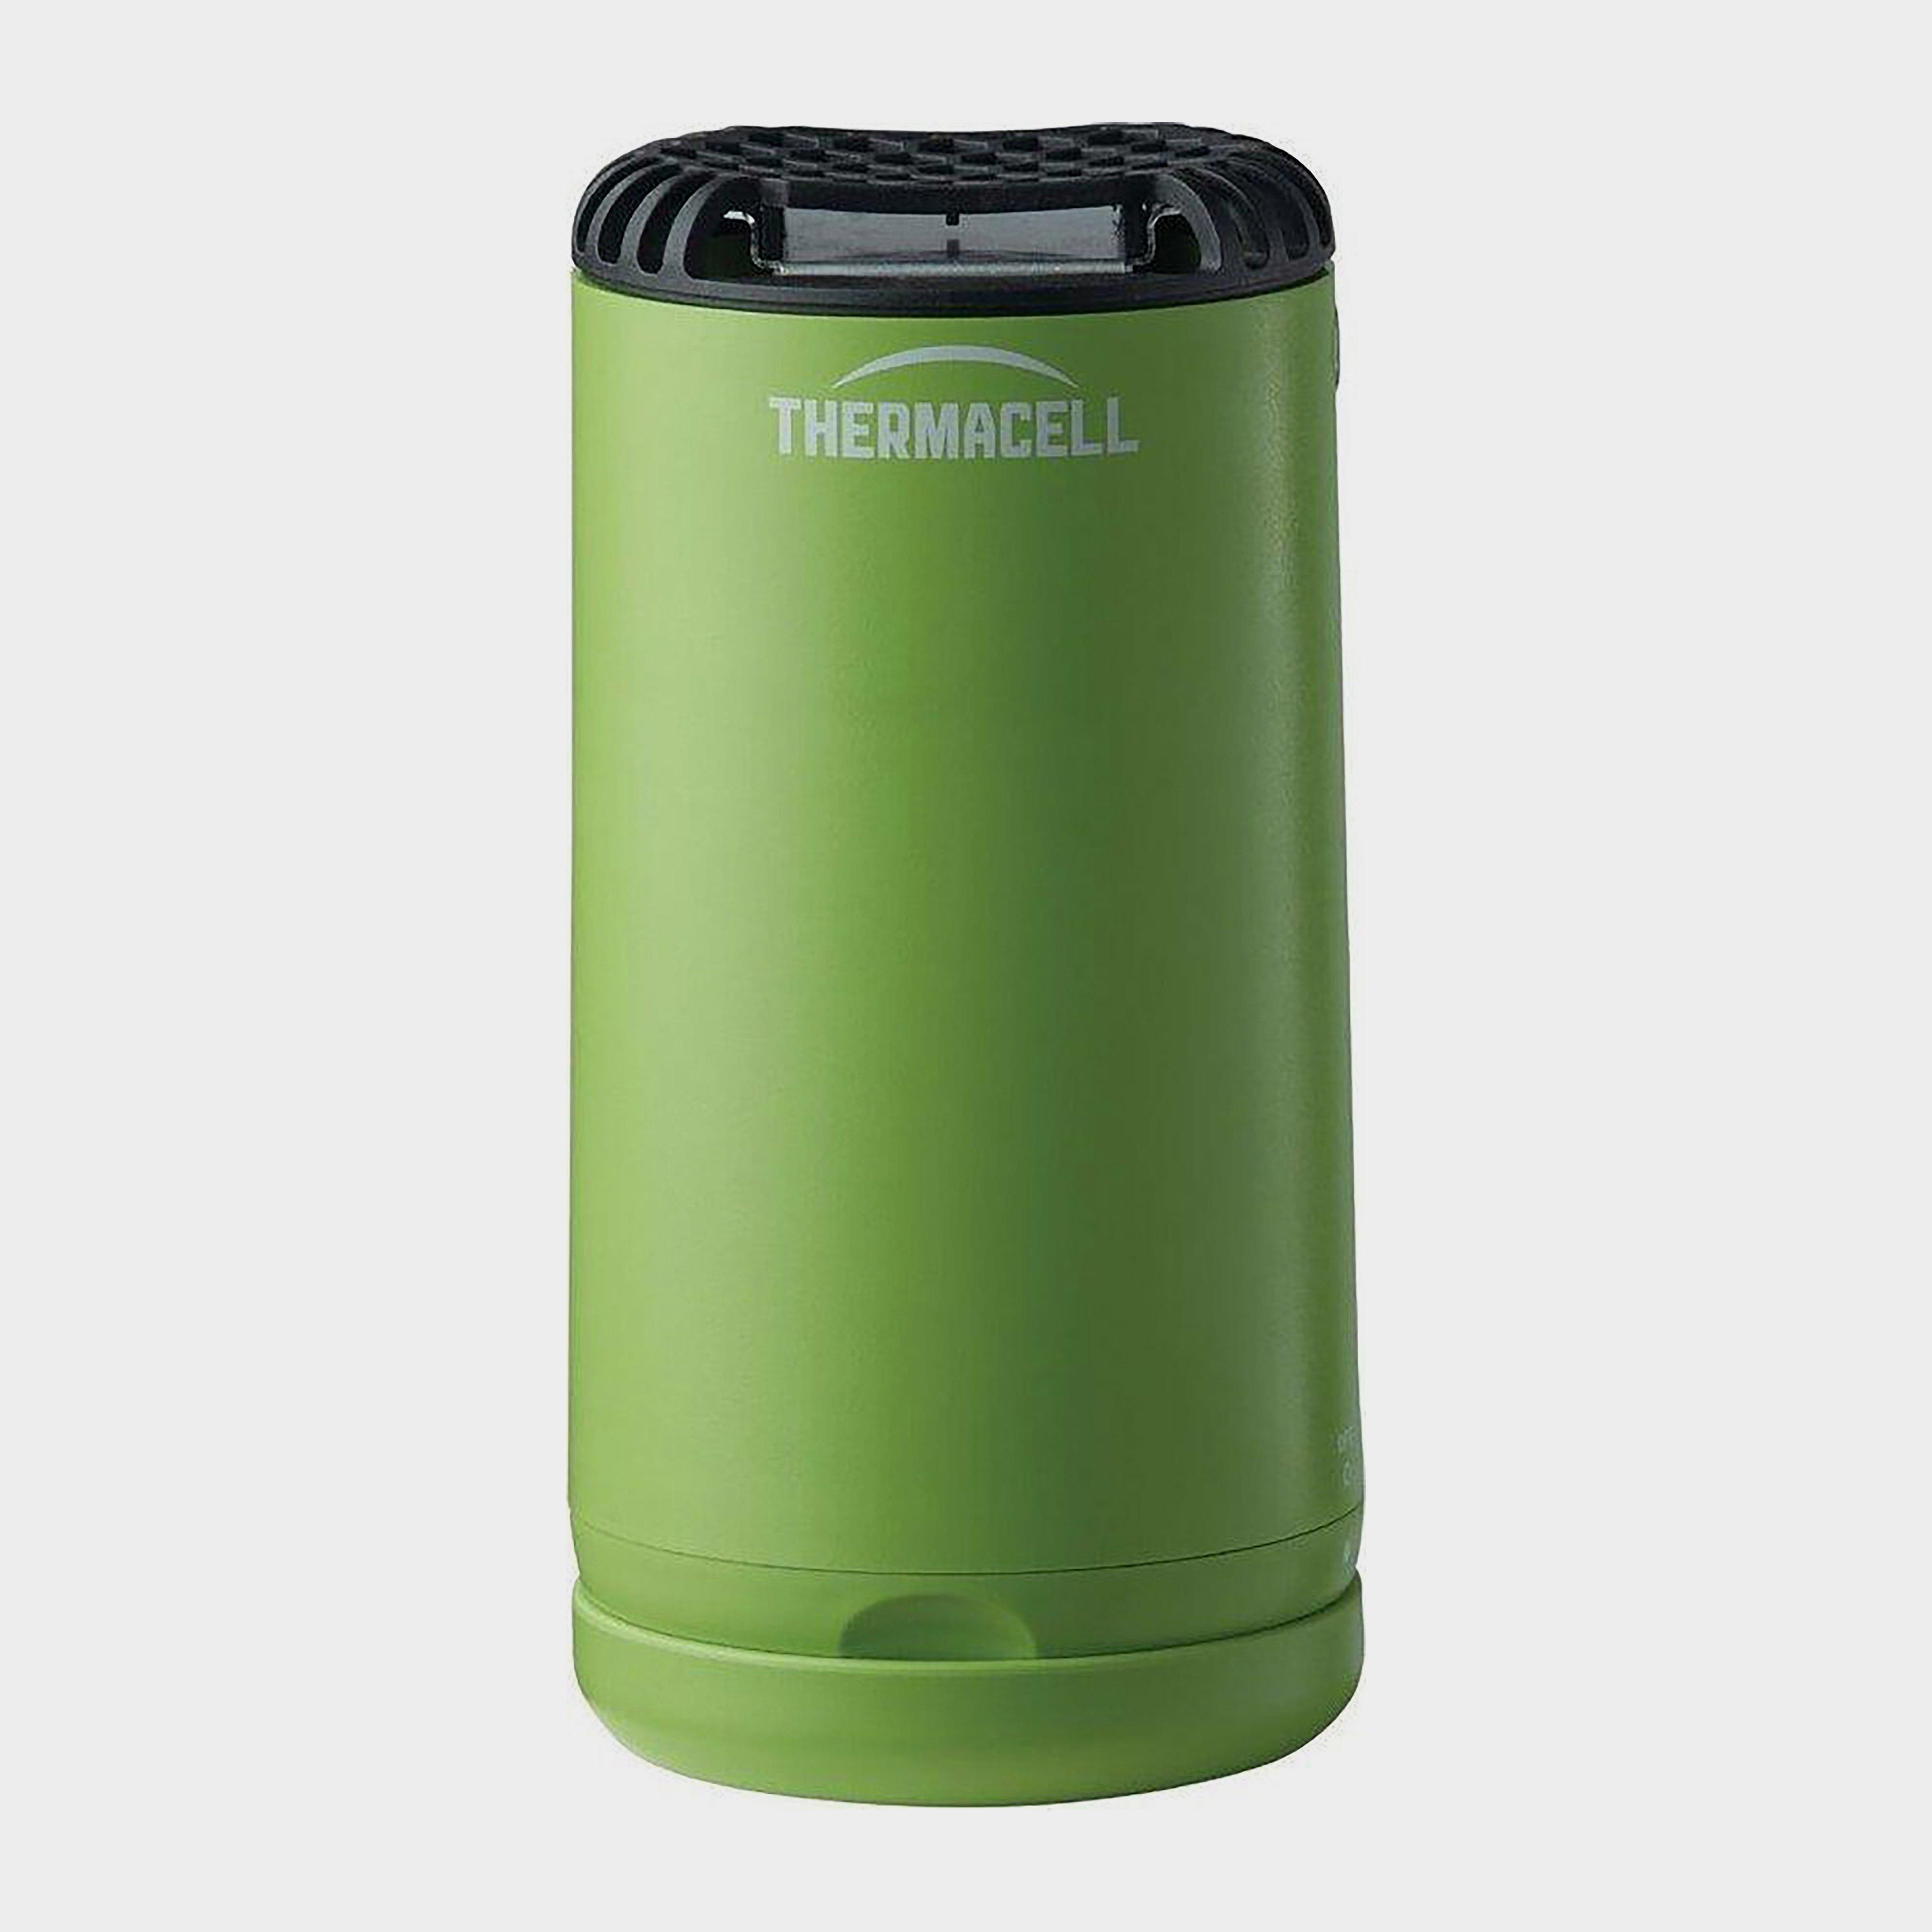 ThermaCELL Thermacell Halo Mini Mosquito Repeller - Green, Green